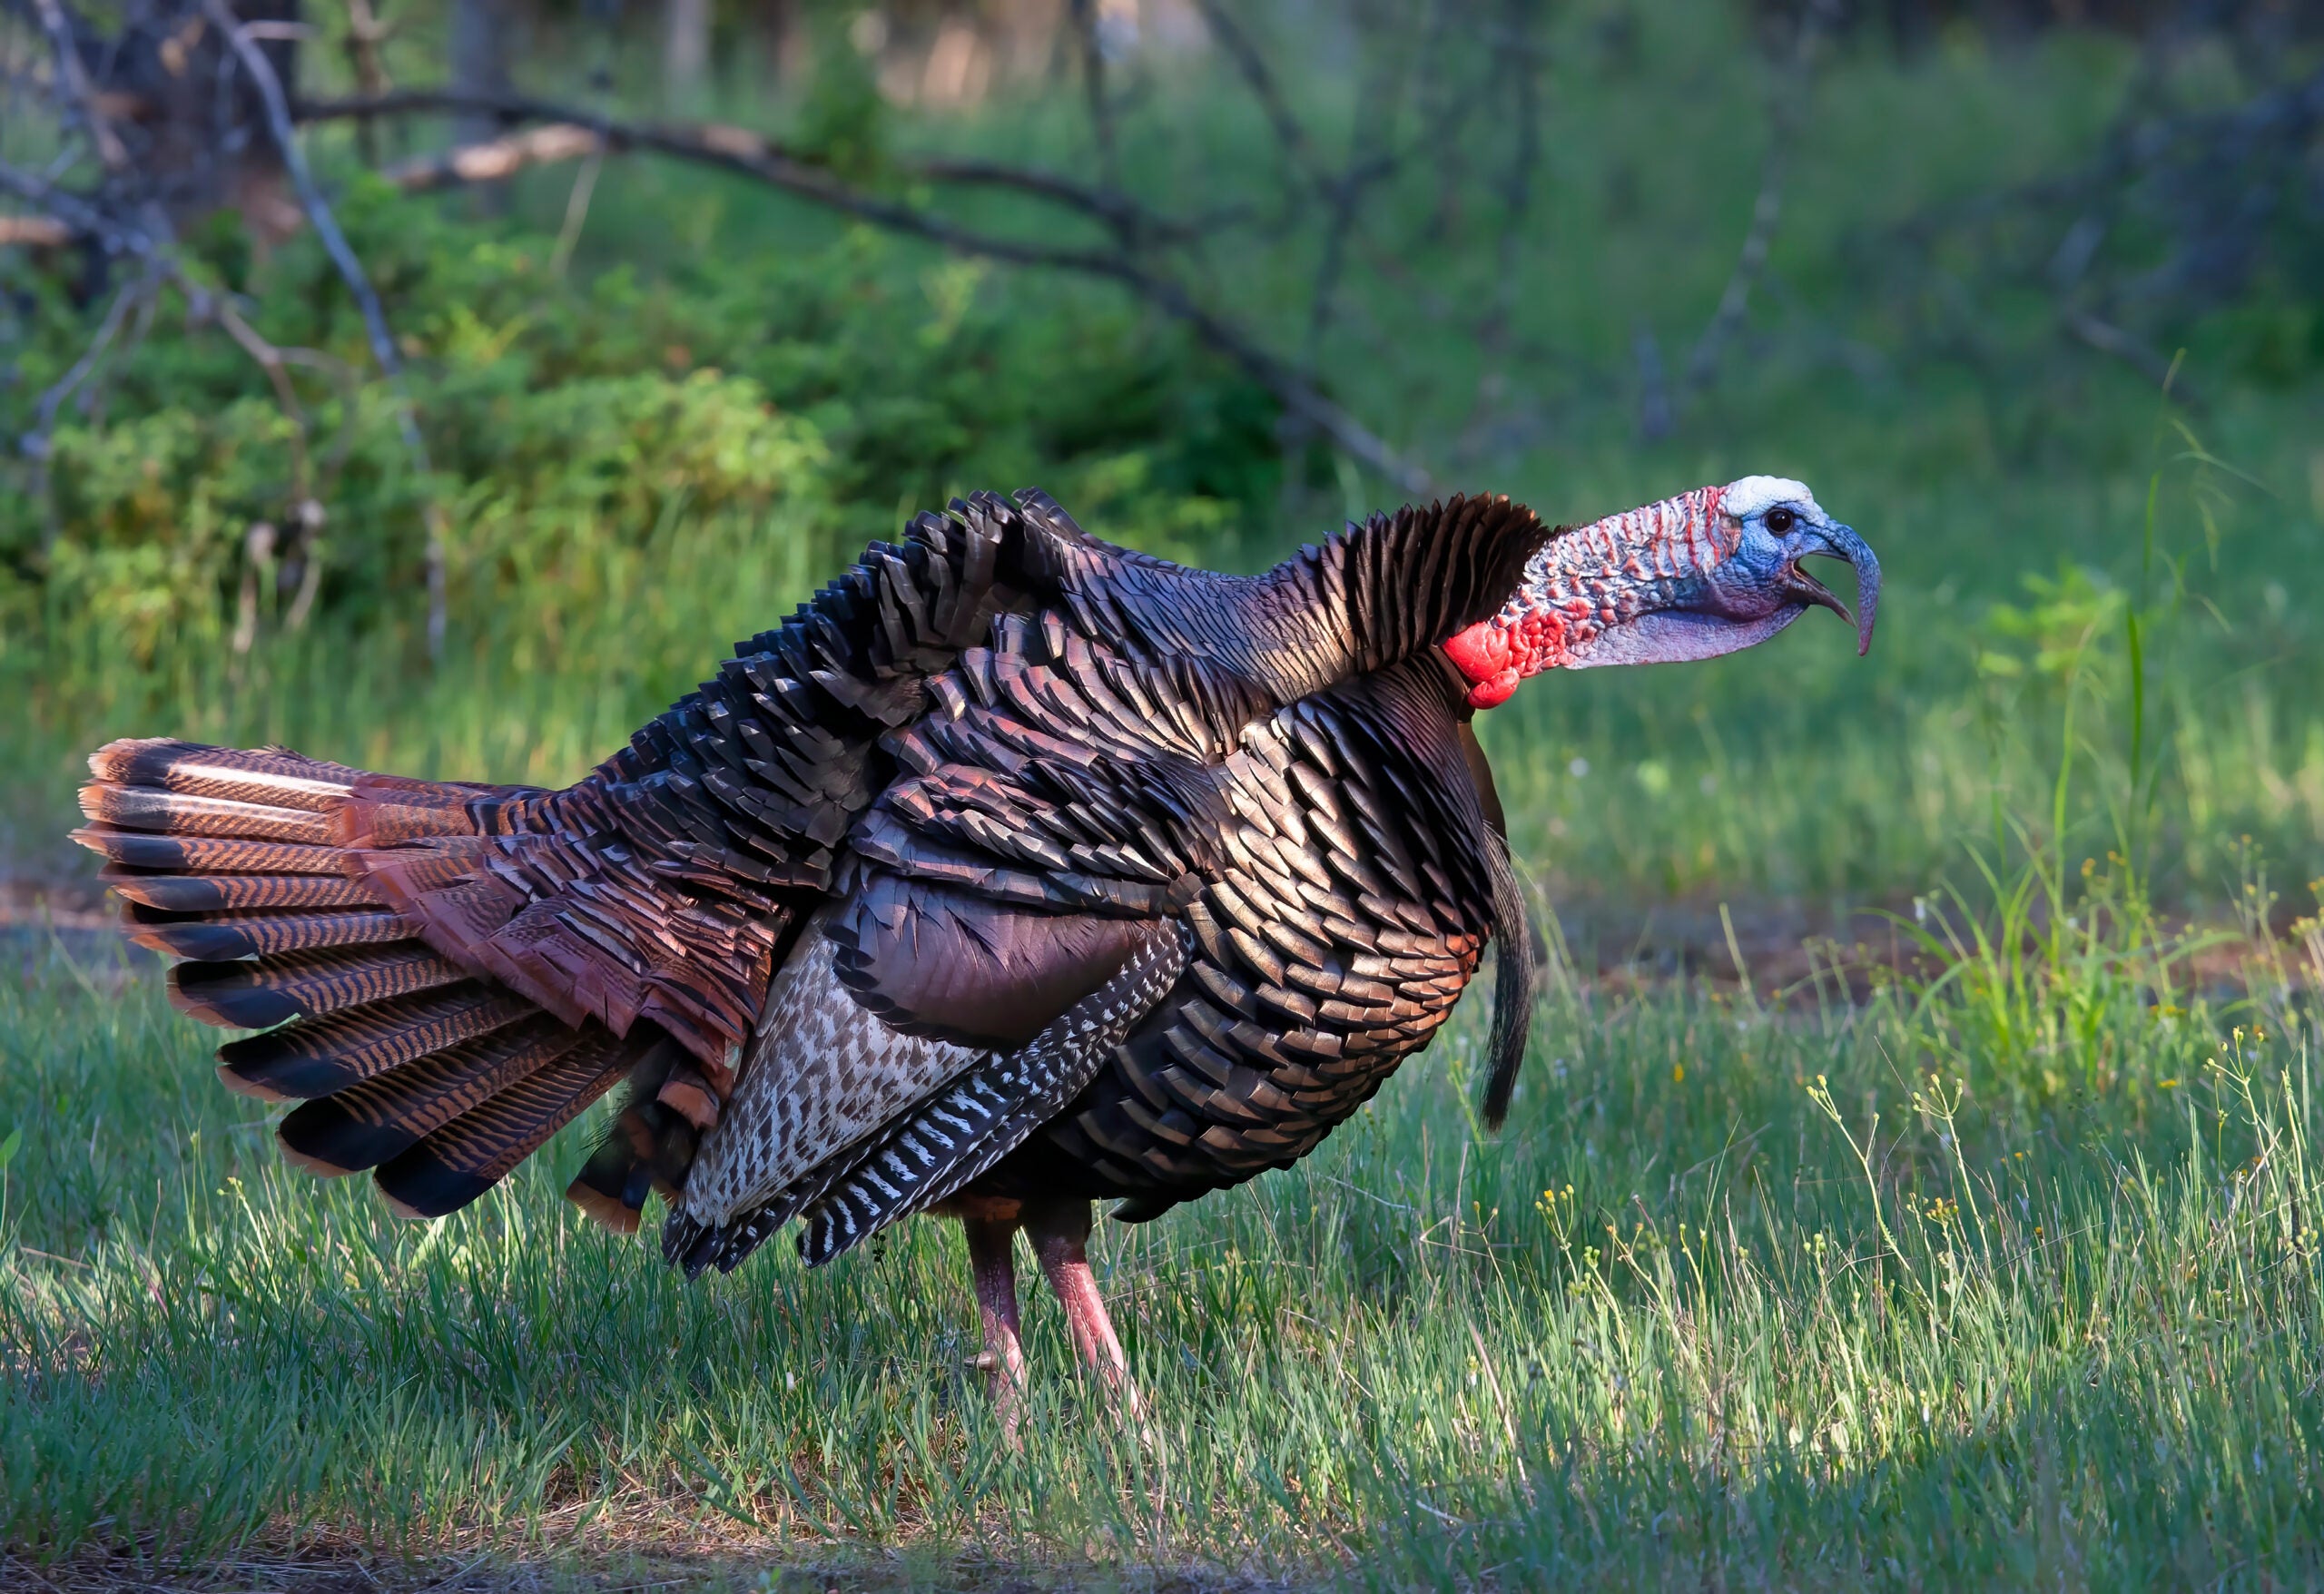 An eastern Tom lets out a gobble.